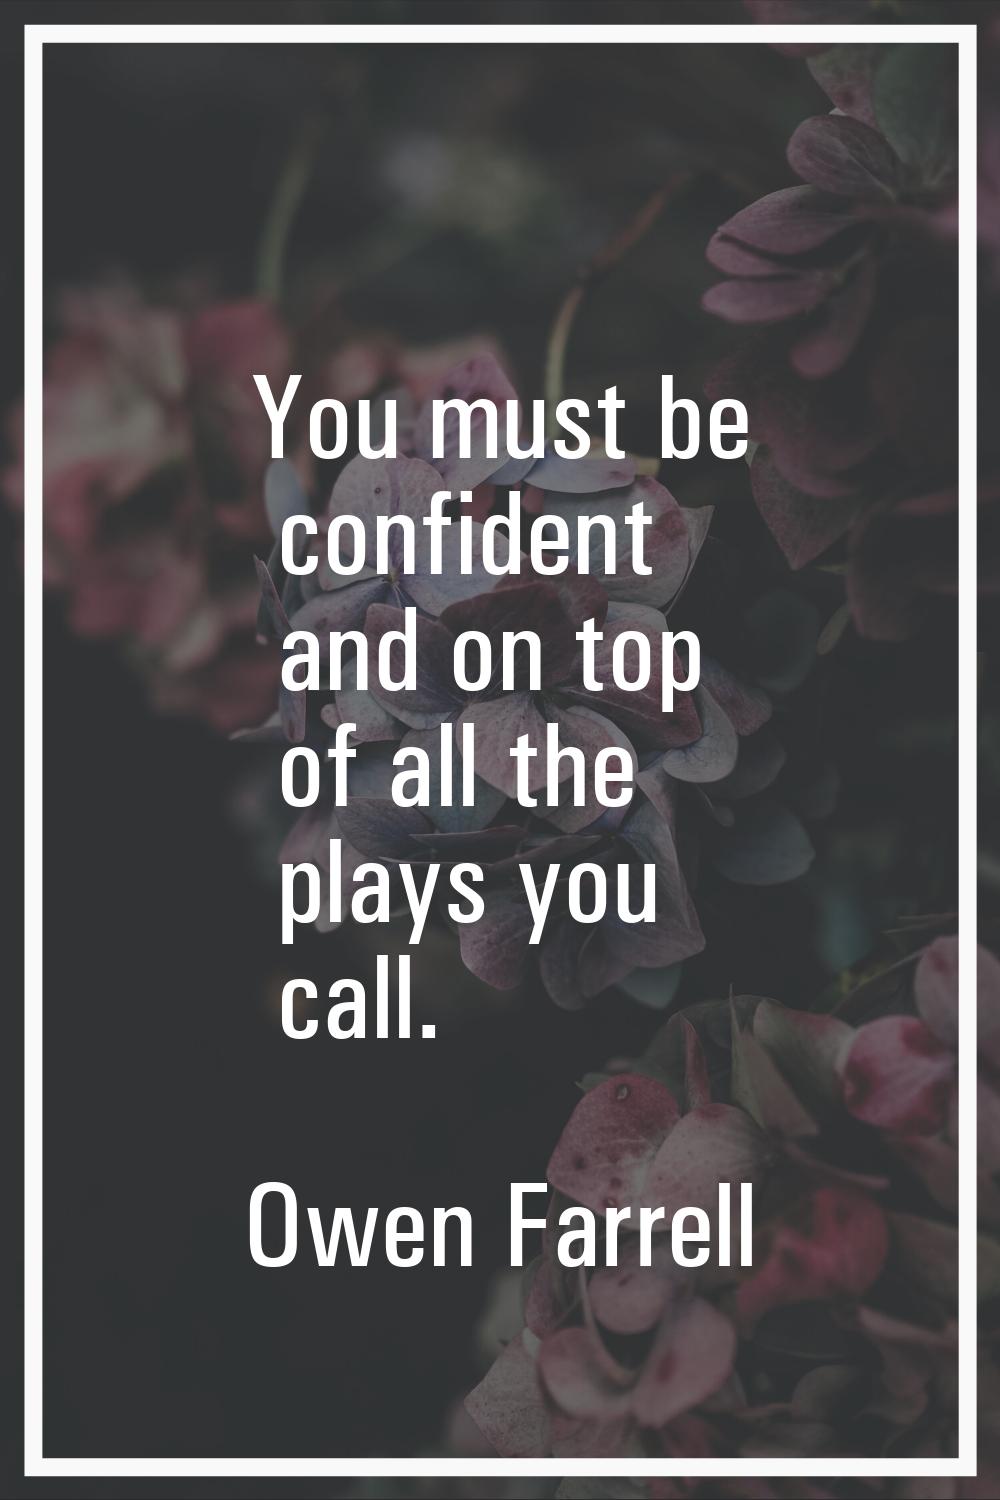 You must be confident and on top of all the plays you call.